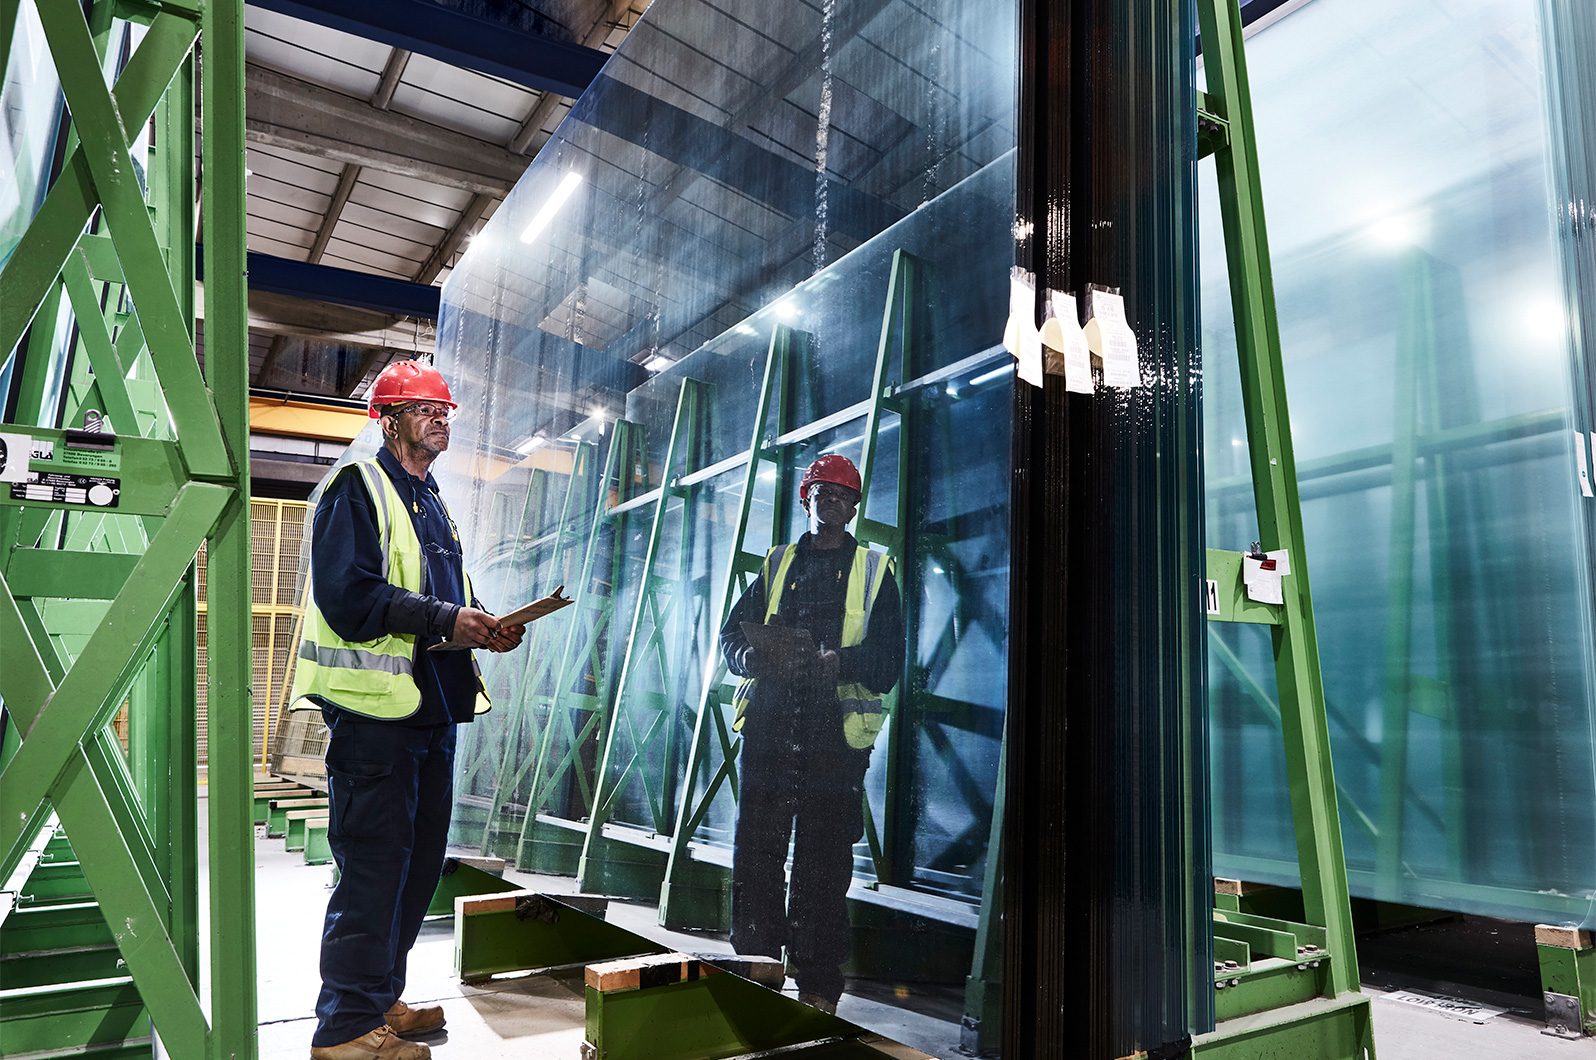 One of a series of images shot in the factory to visually portray the scale of the glass sheets.